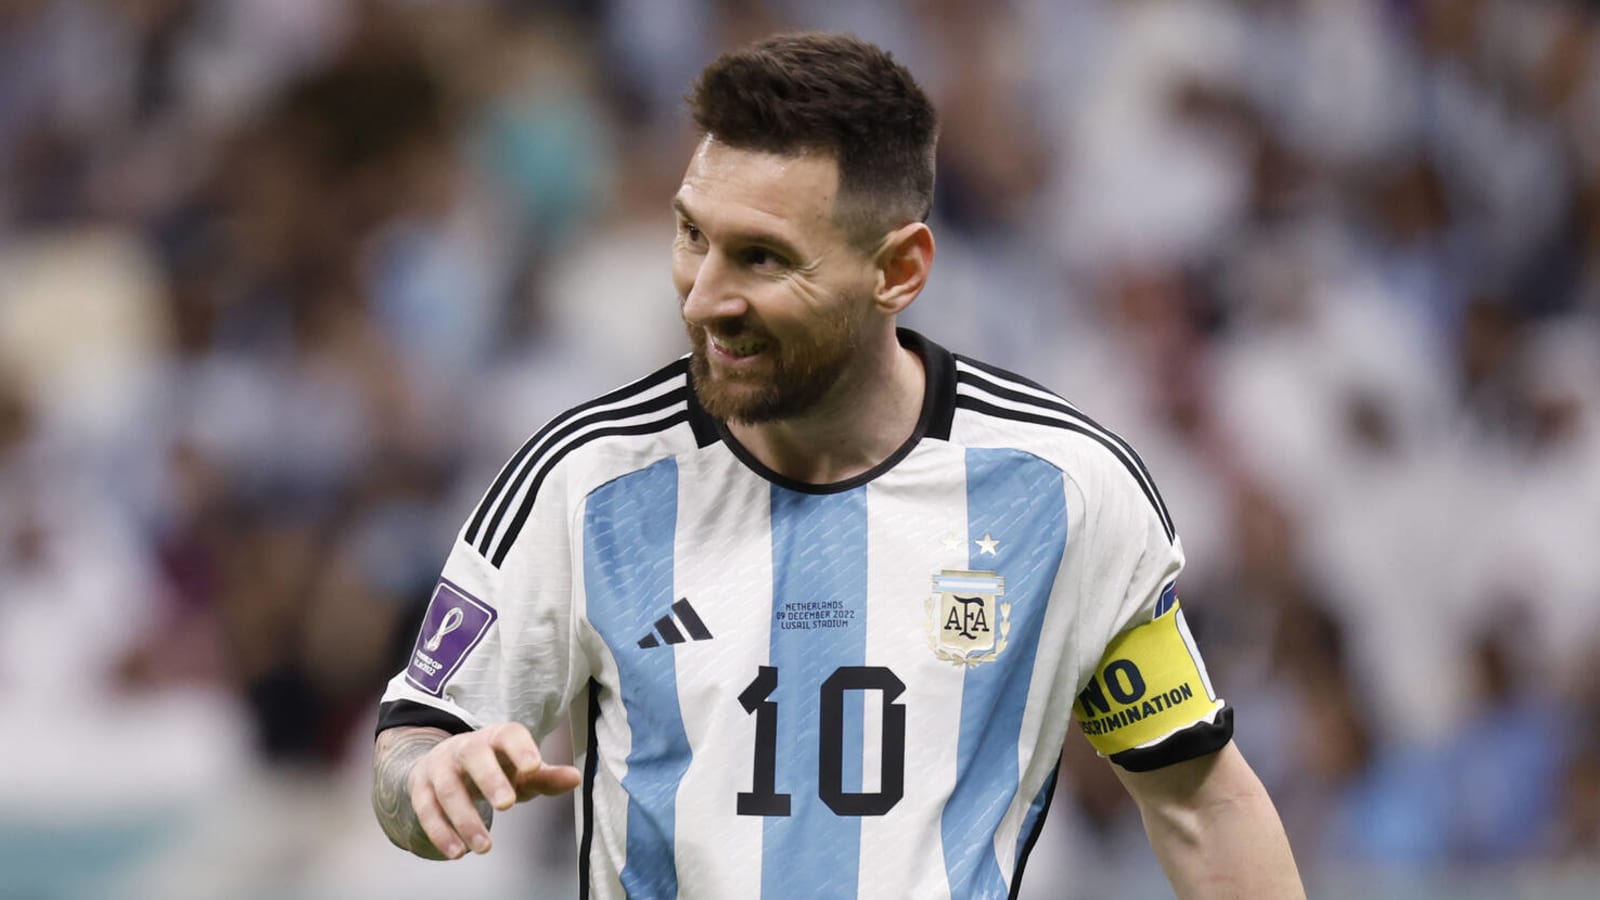 Spanish football expert: Messi has not decided on future